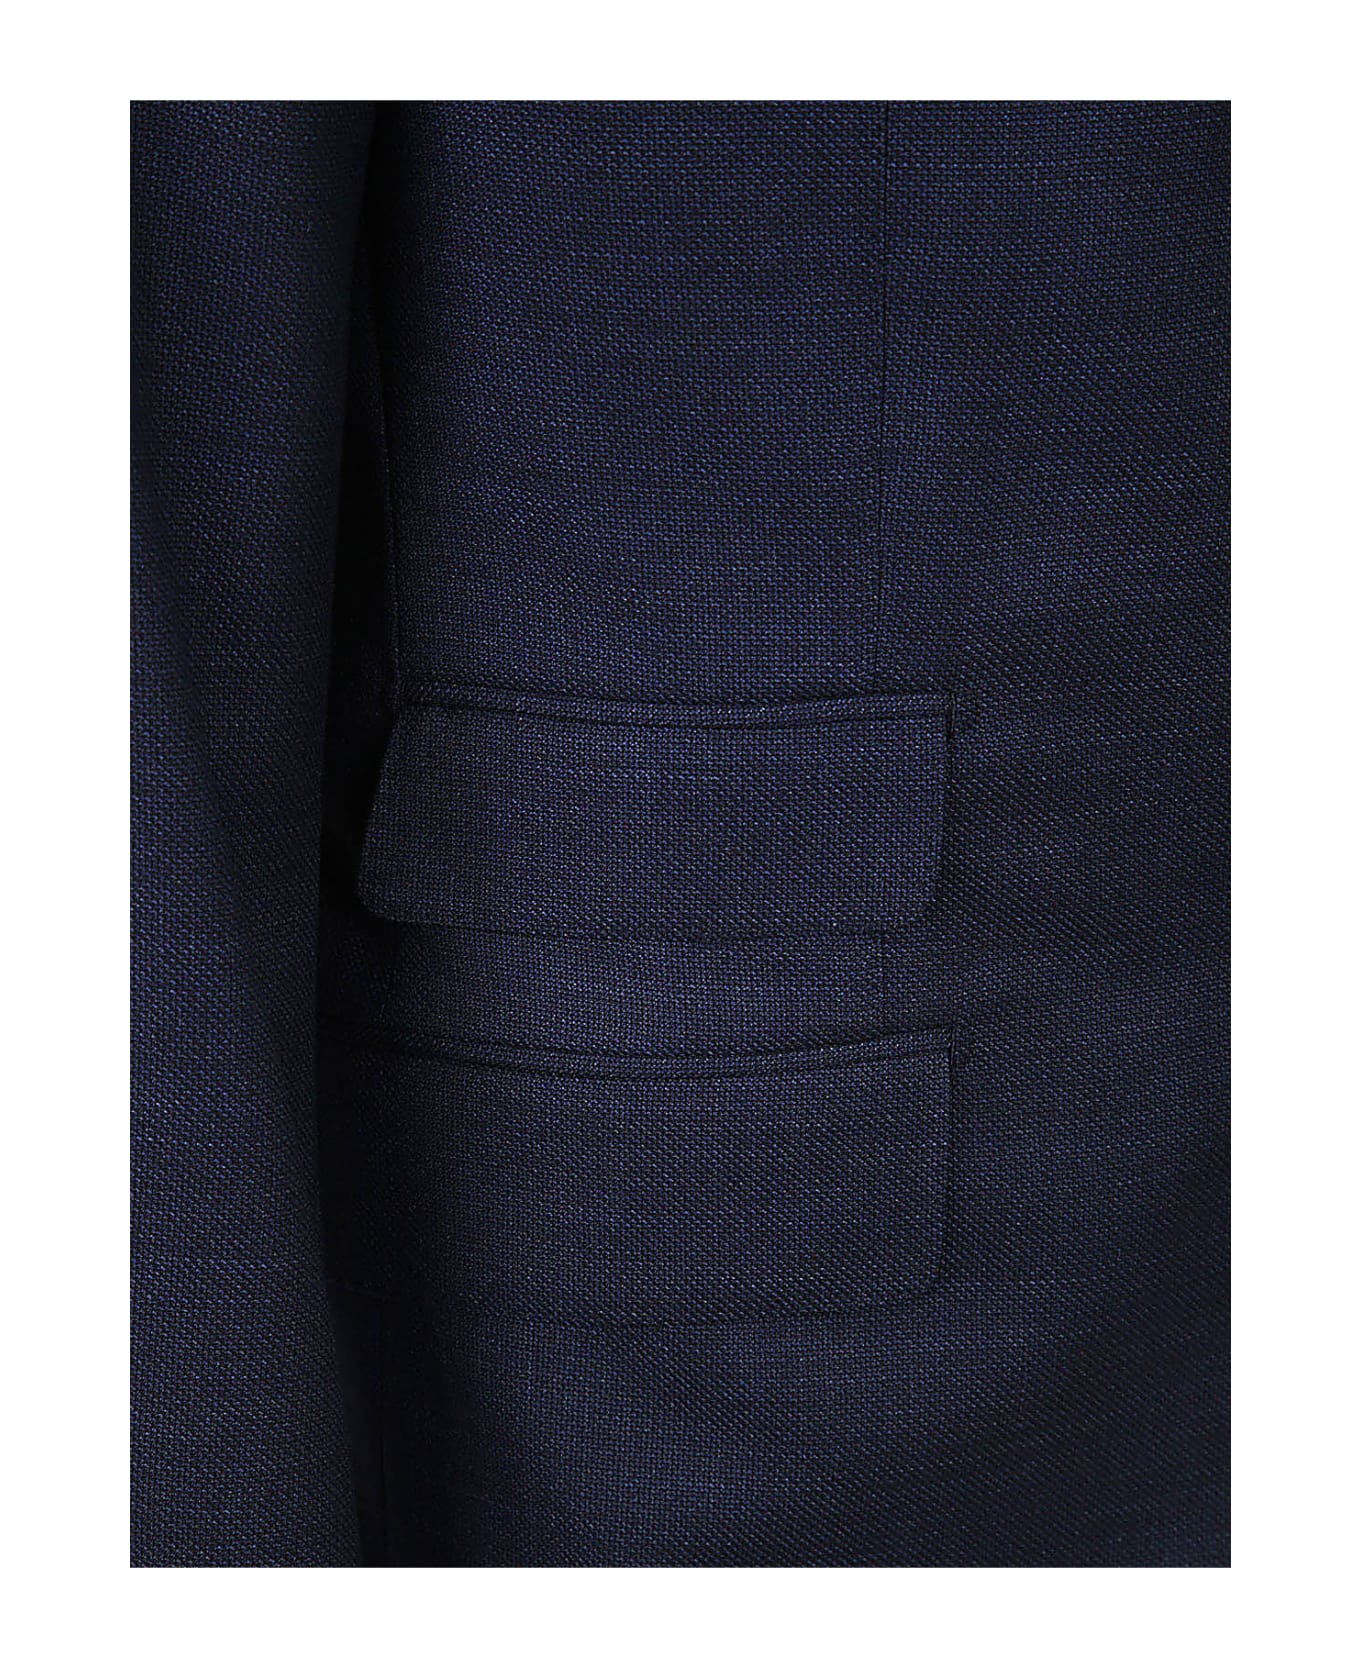 Tom Ford Micro Structure O Connor Suit - Ink スーツ